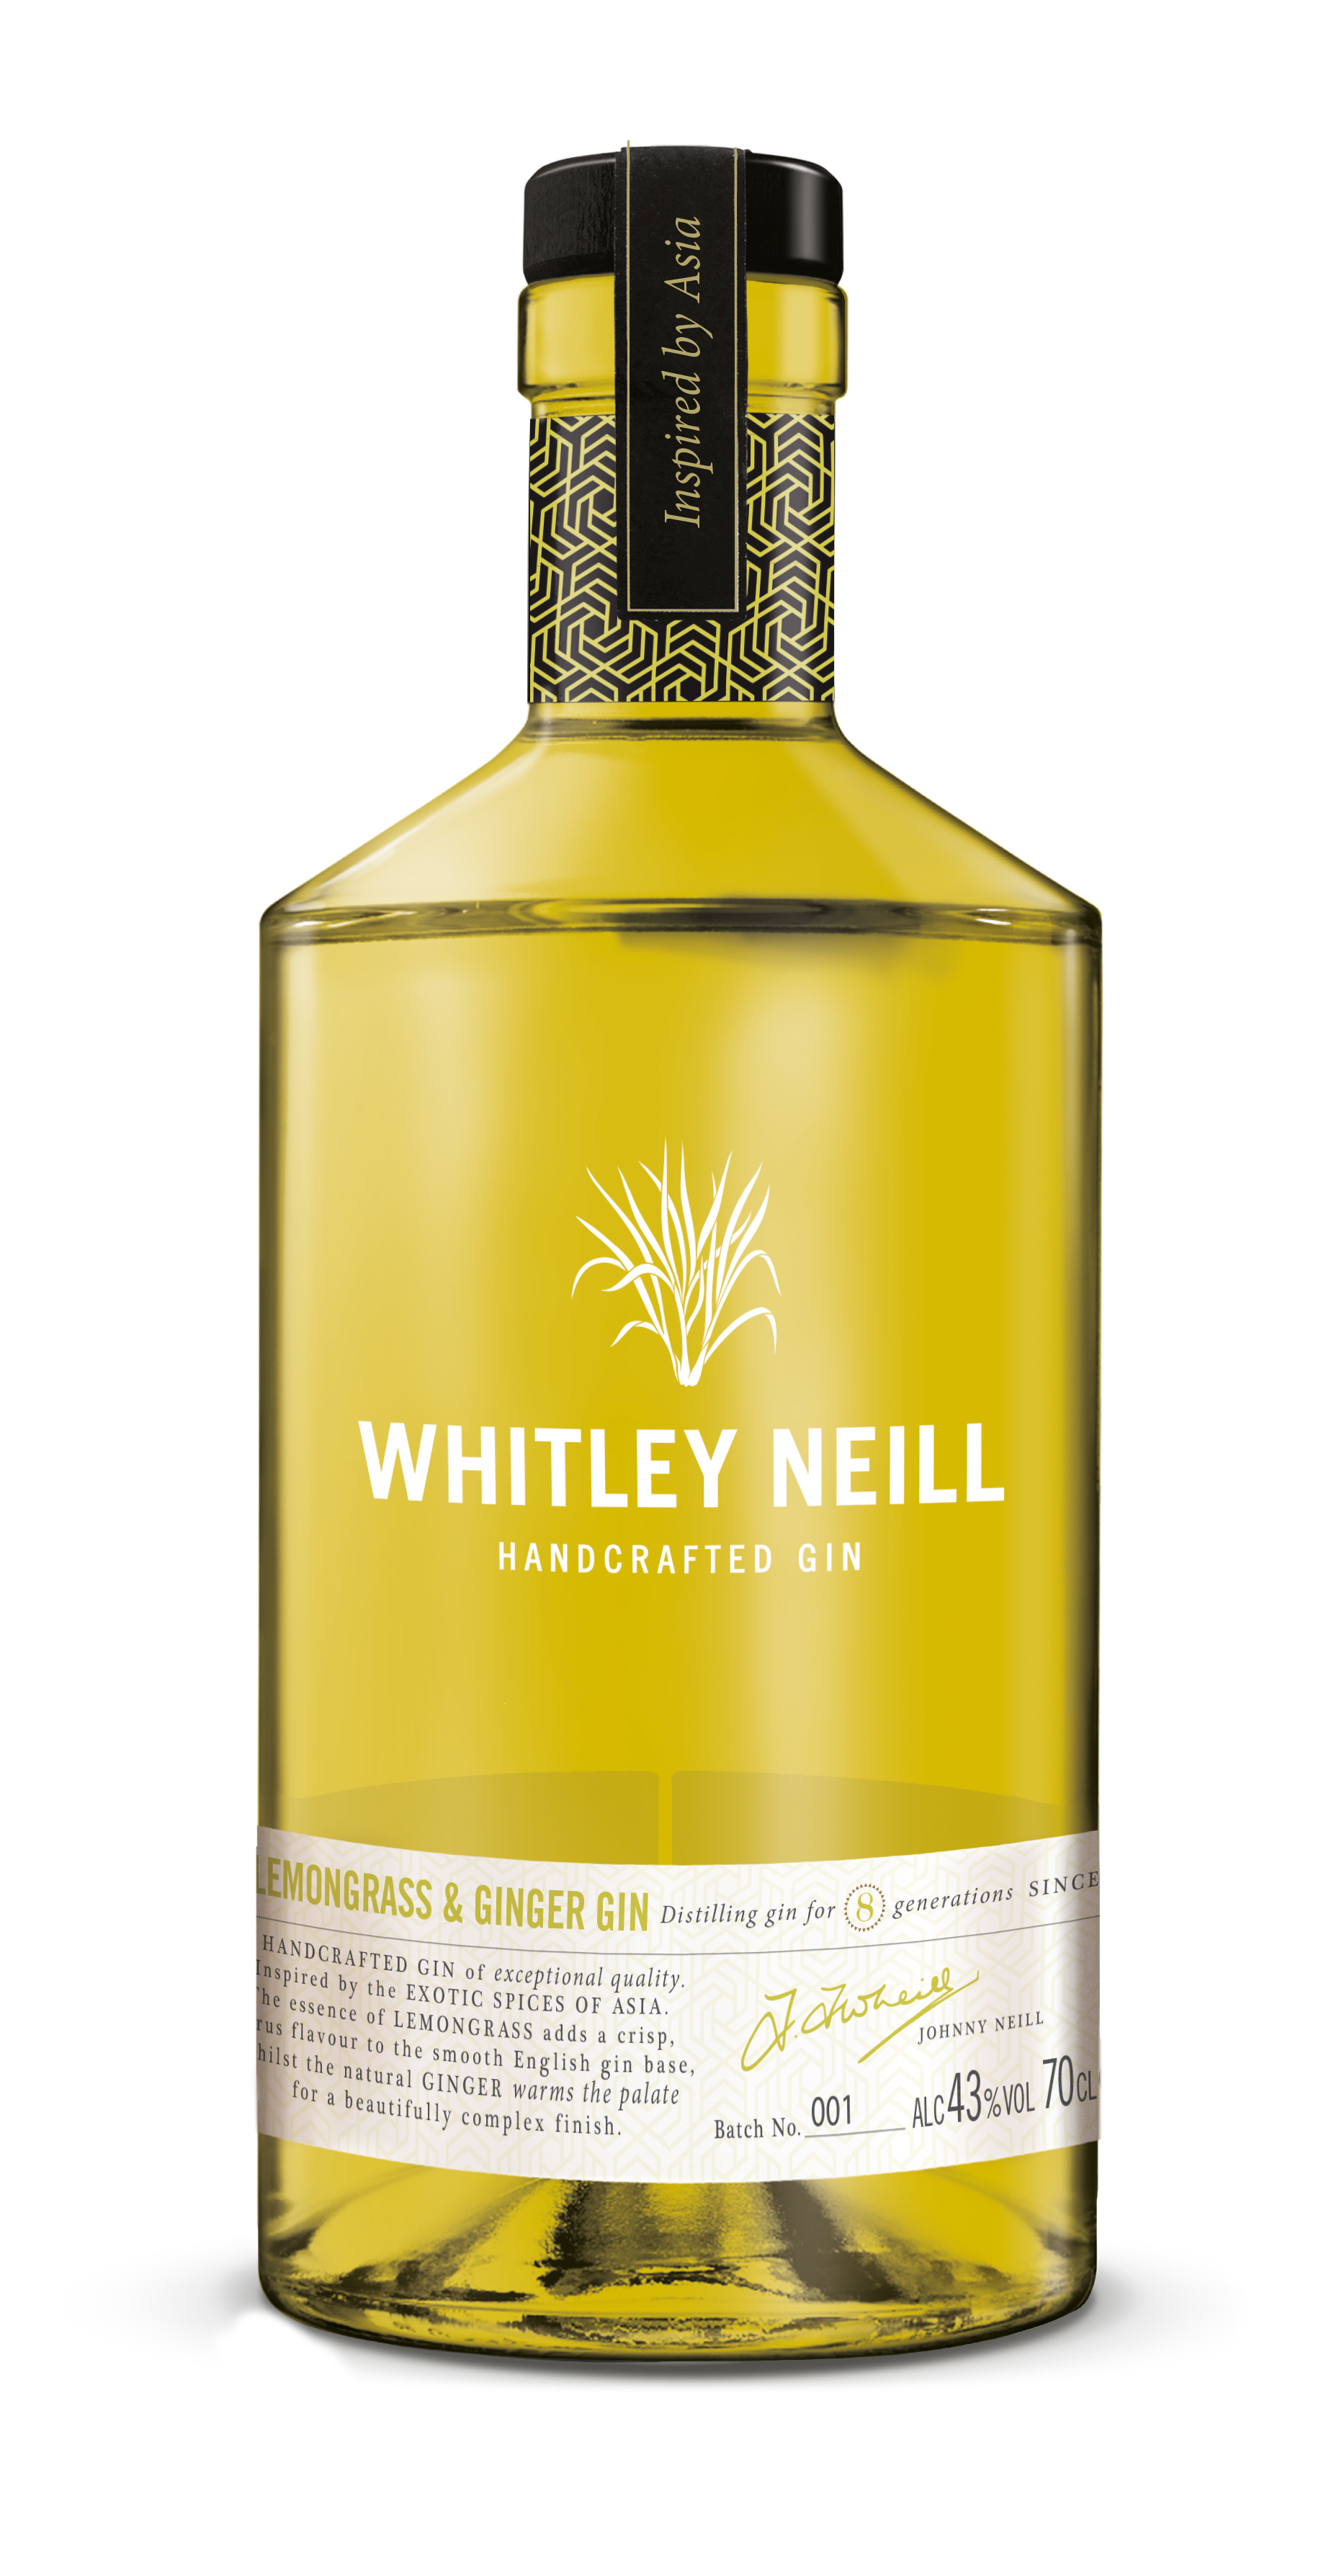 Halewood Wines & Spirits Adds Lemongrass & Ginger Gin To Whitley Neill Offer photo